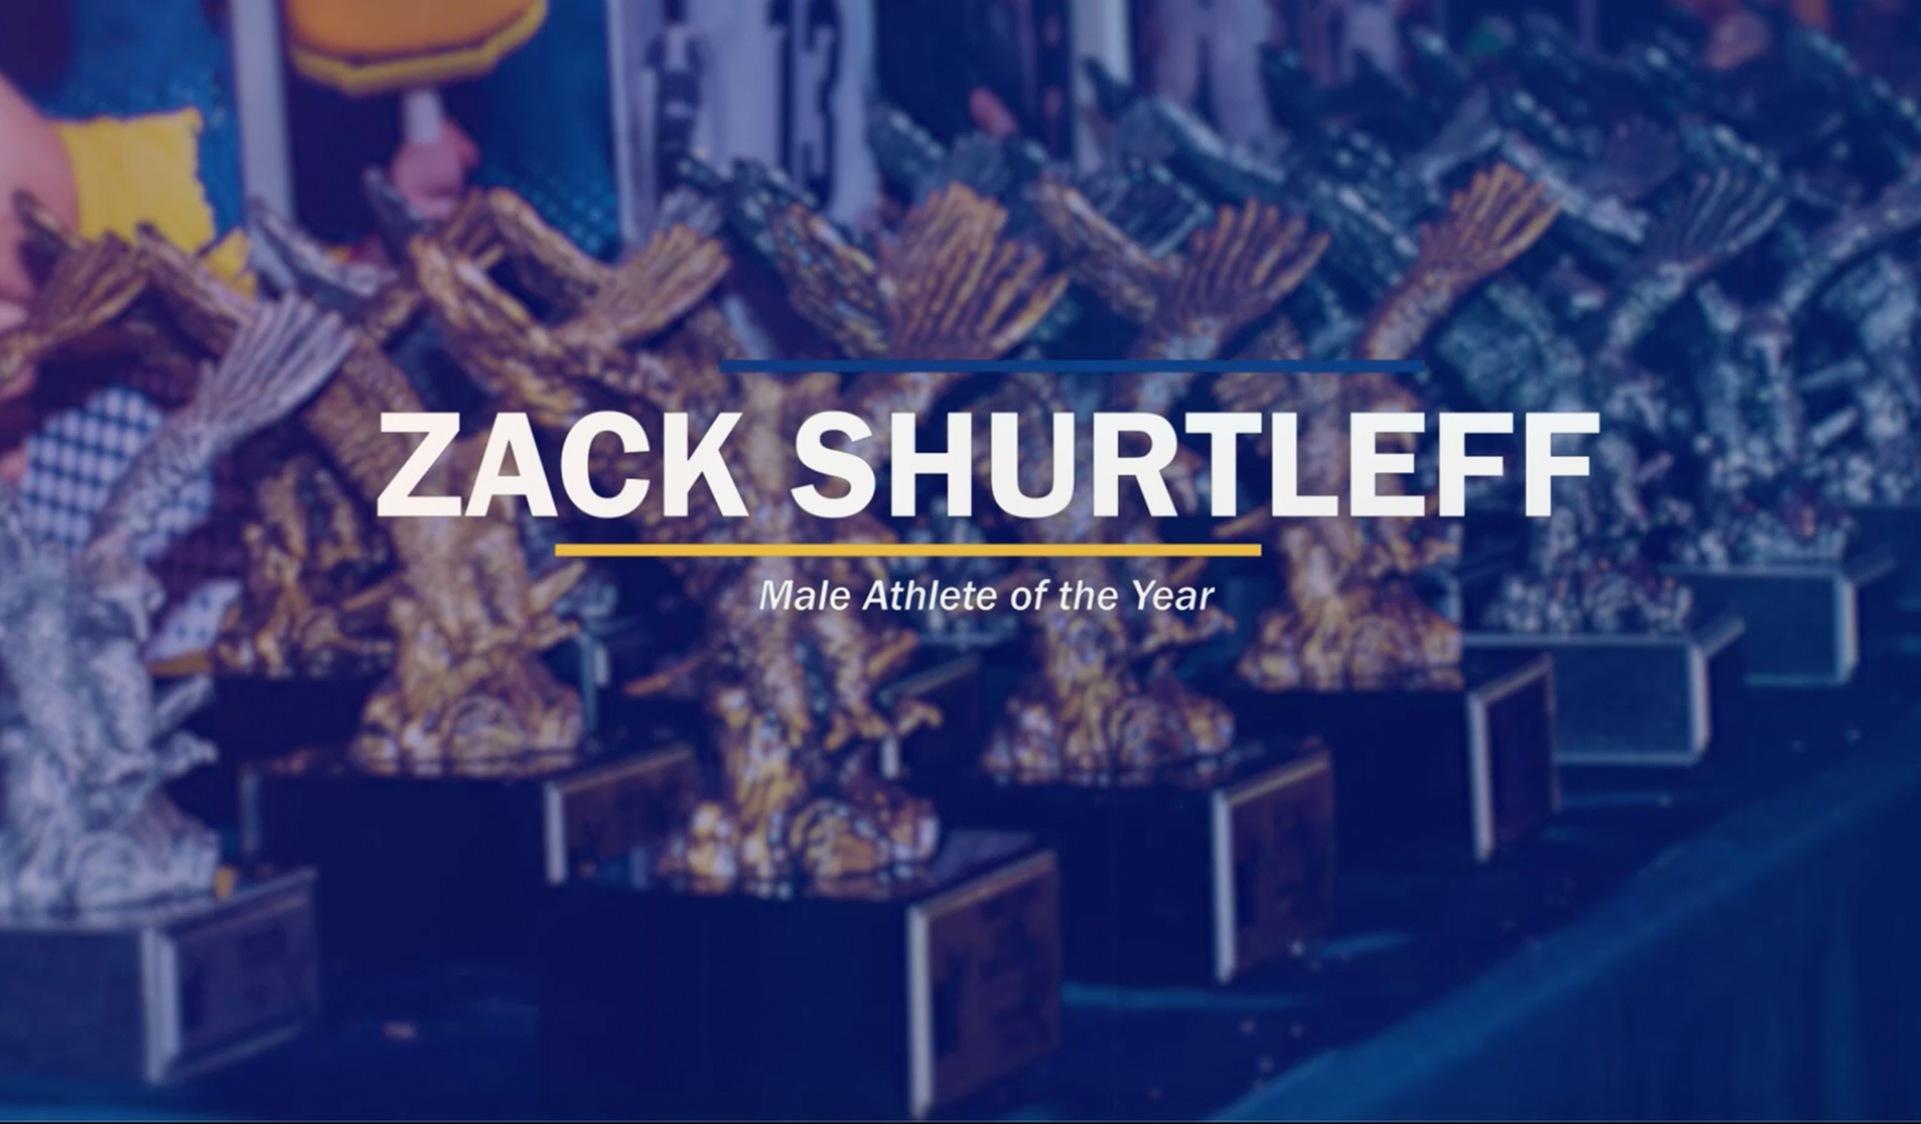 2020 Humber Male Athlete of the Year: Zack Shurtleff